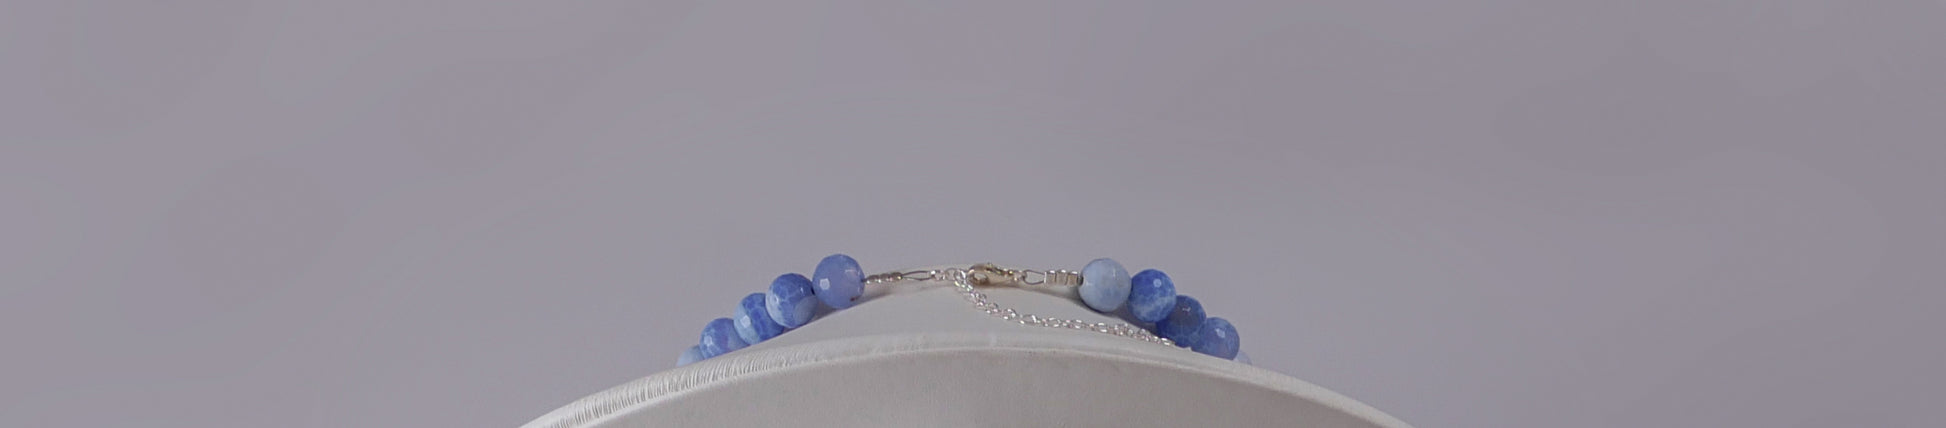 Blue Agates and Sterling Silver Necklace - Katerina Roukouna